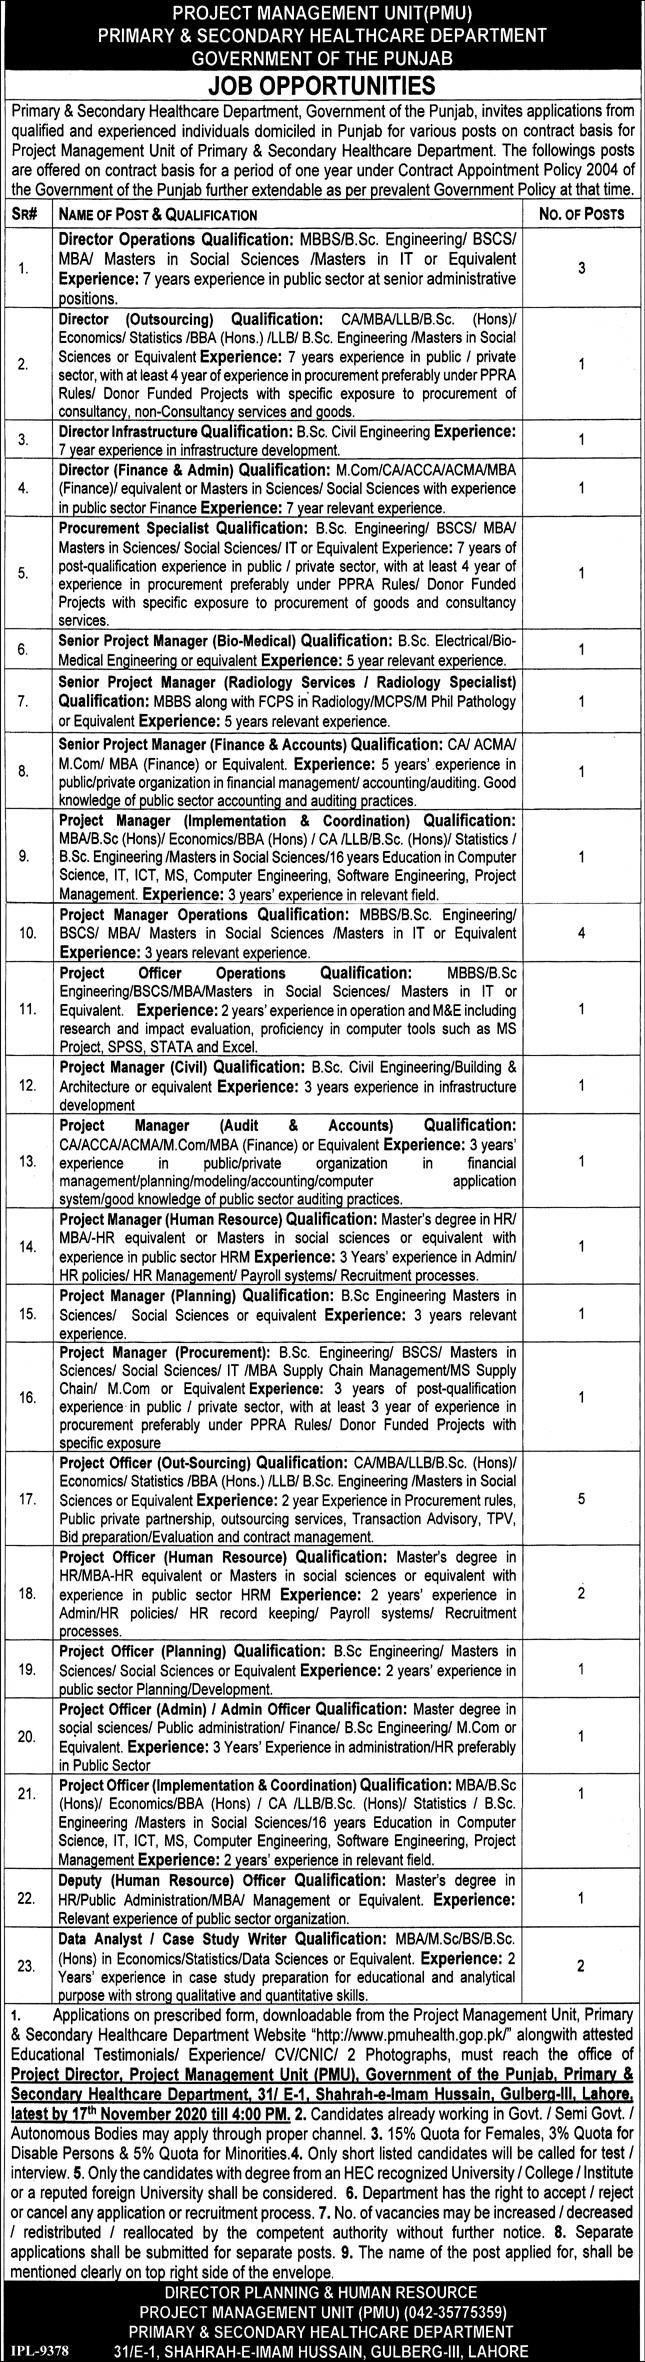 Primary & Secondary Healthcare Department Lahore Jobs 2020